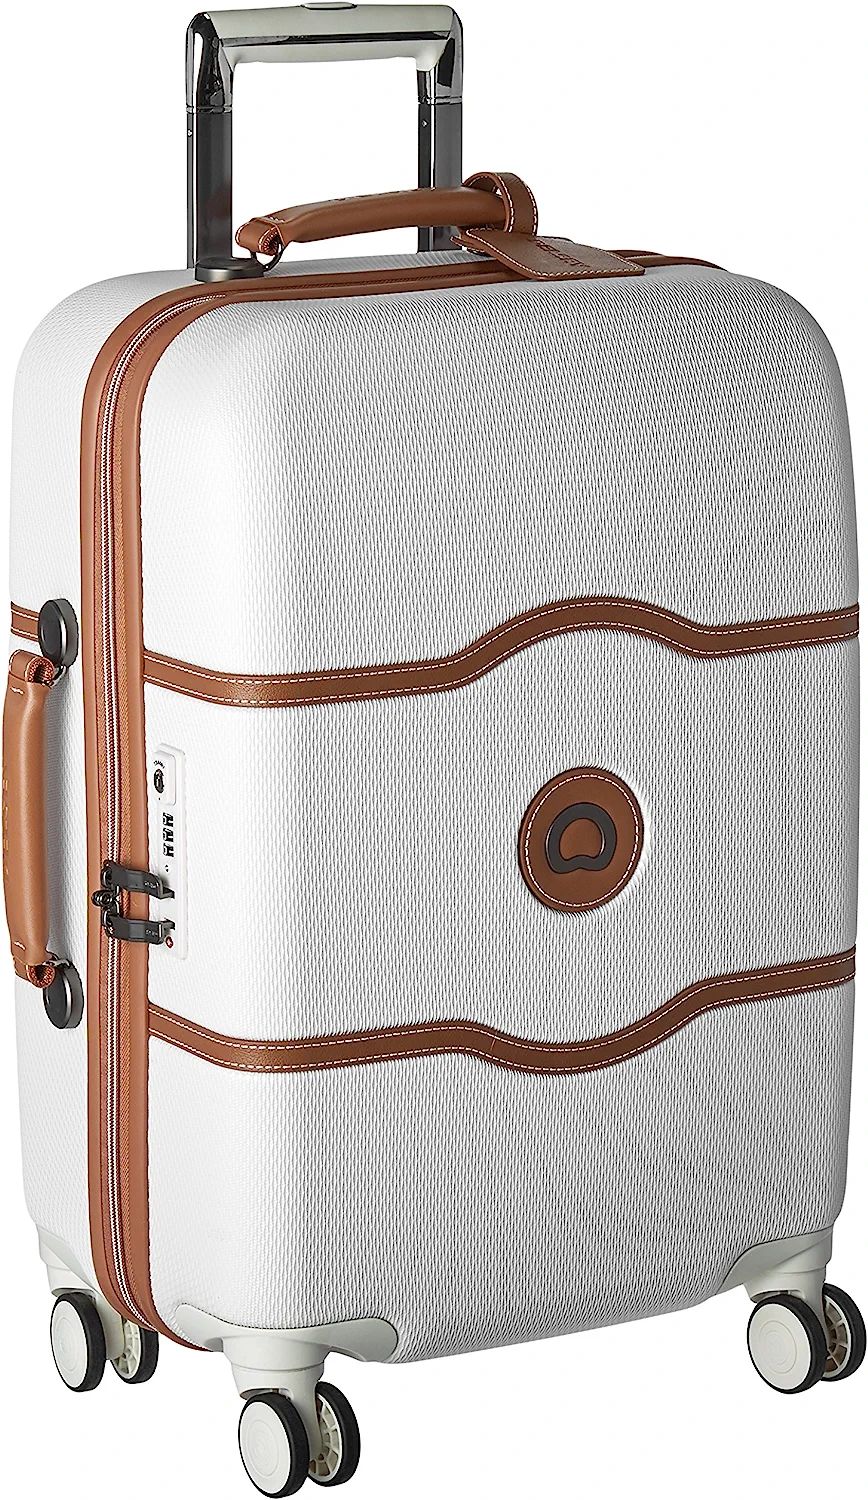 DELSEY Paris Chatelet Hardside Luggage with Spinner Wheels, Champagne White, Carry-on 21 Inch, wi... | Amazon (US)